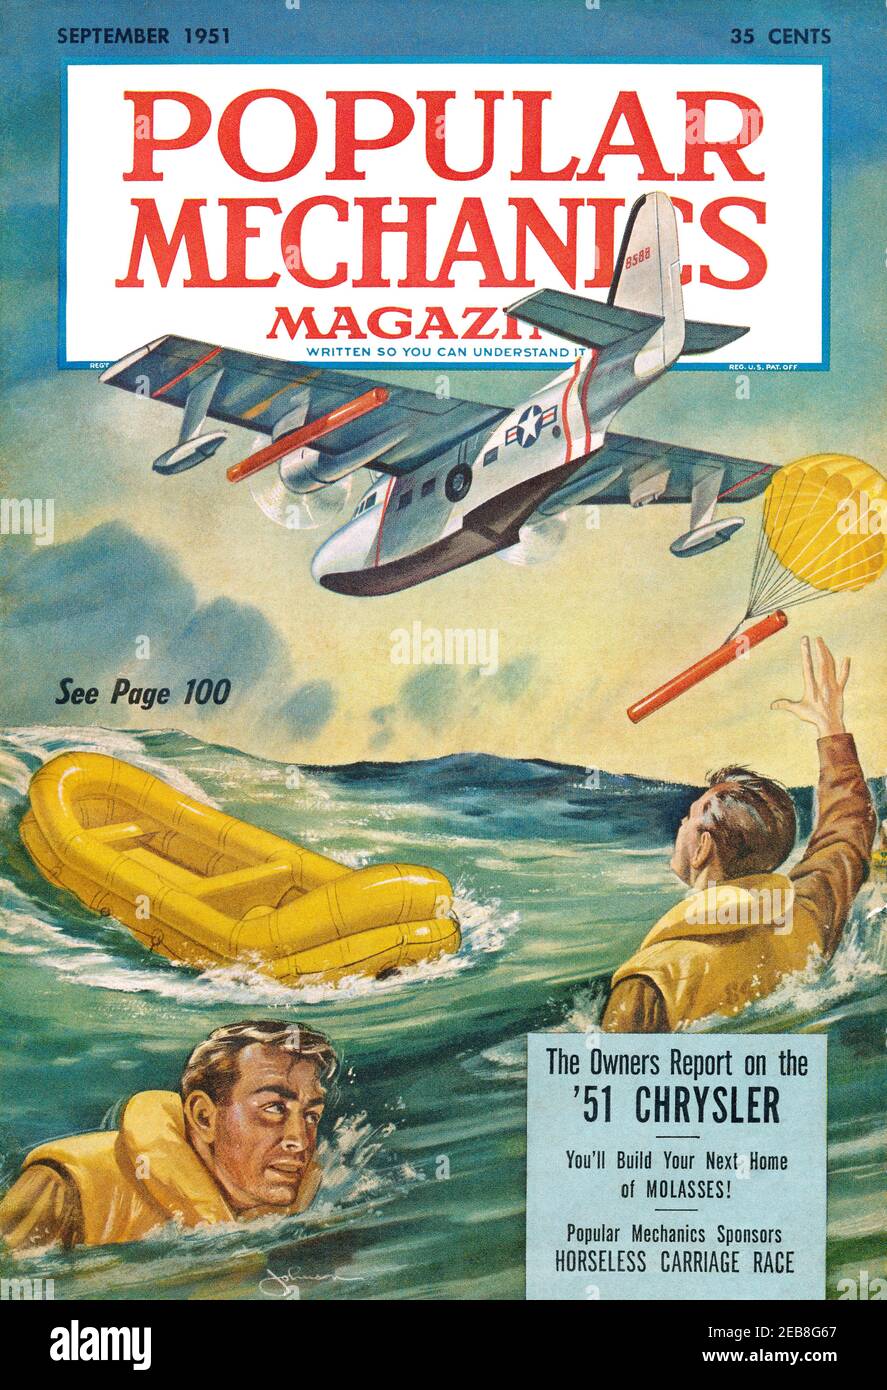 Vintage front cover of Popular Mechanics magazine for September 1951, featuring an air-sea rescue illustration. Stock Photo